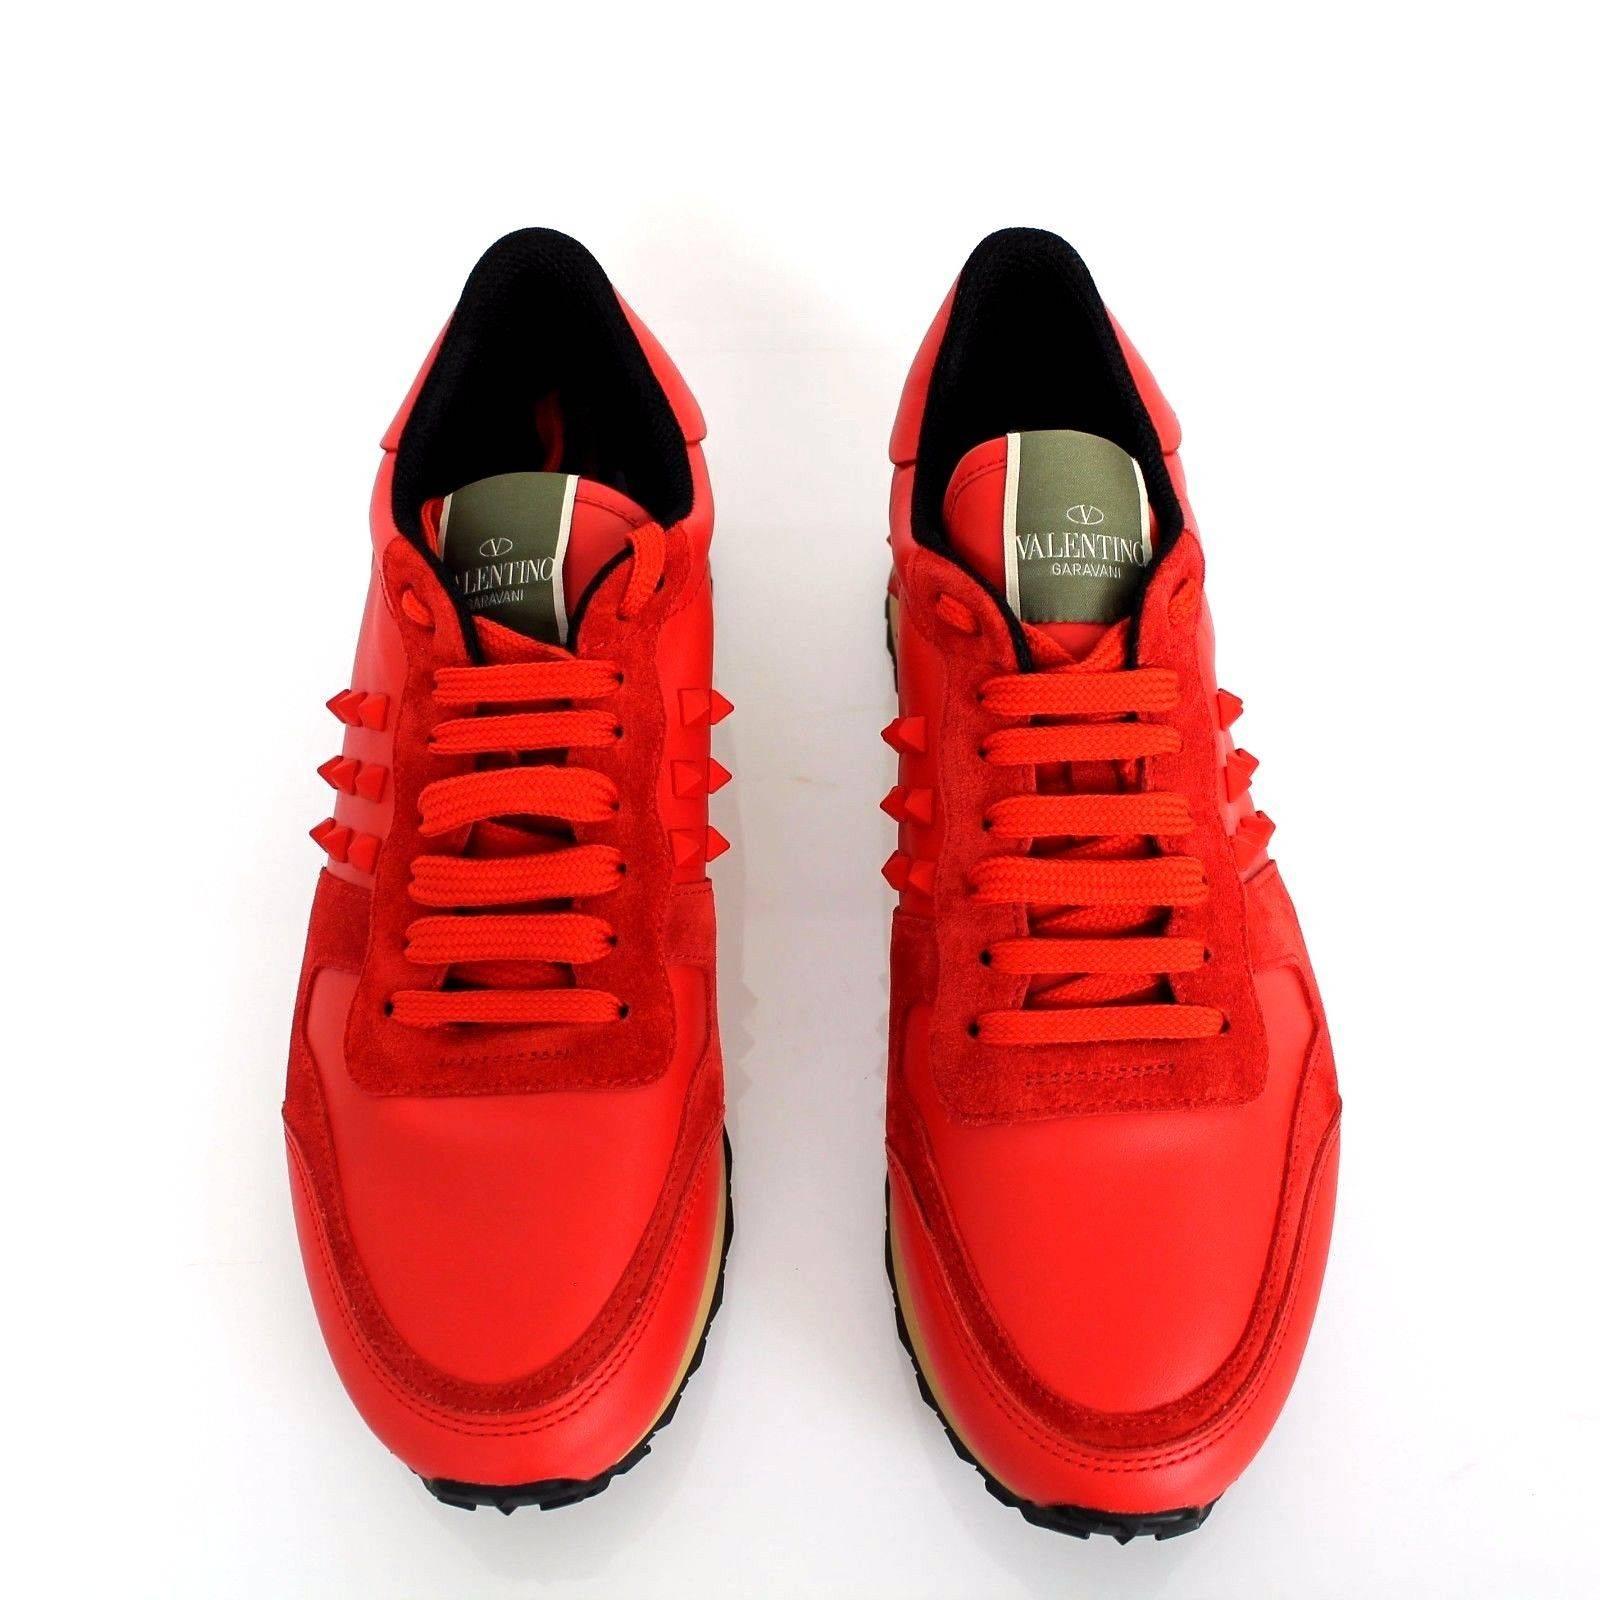 Valentino Red Leather Suede Rockstud Studded Lace up Sneakers New In New Condition For Sale In Miami, FL